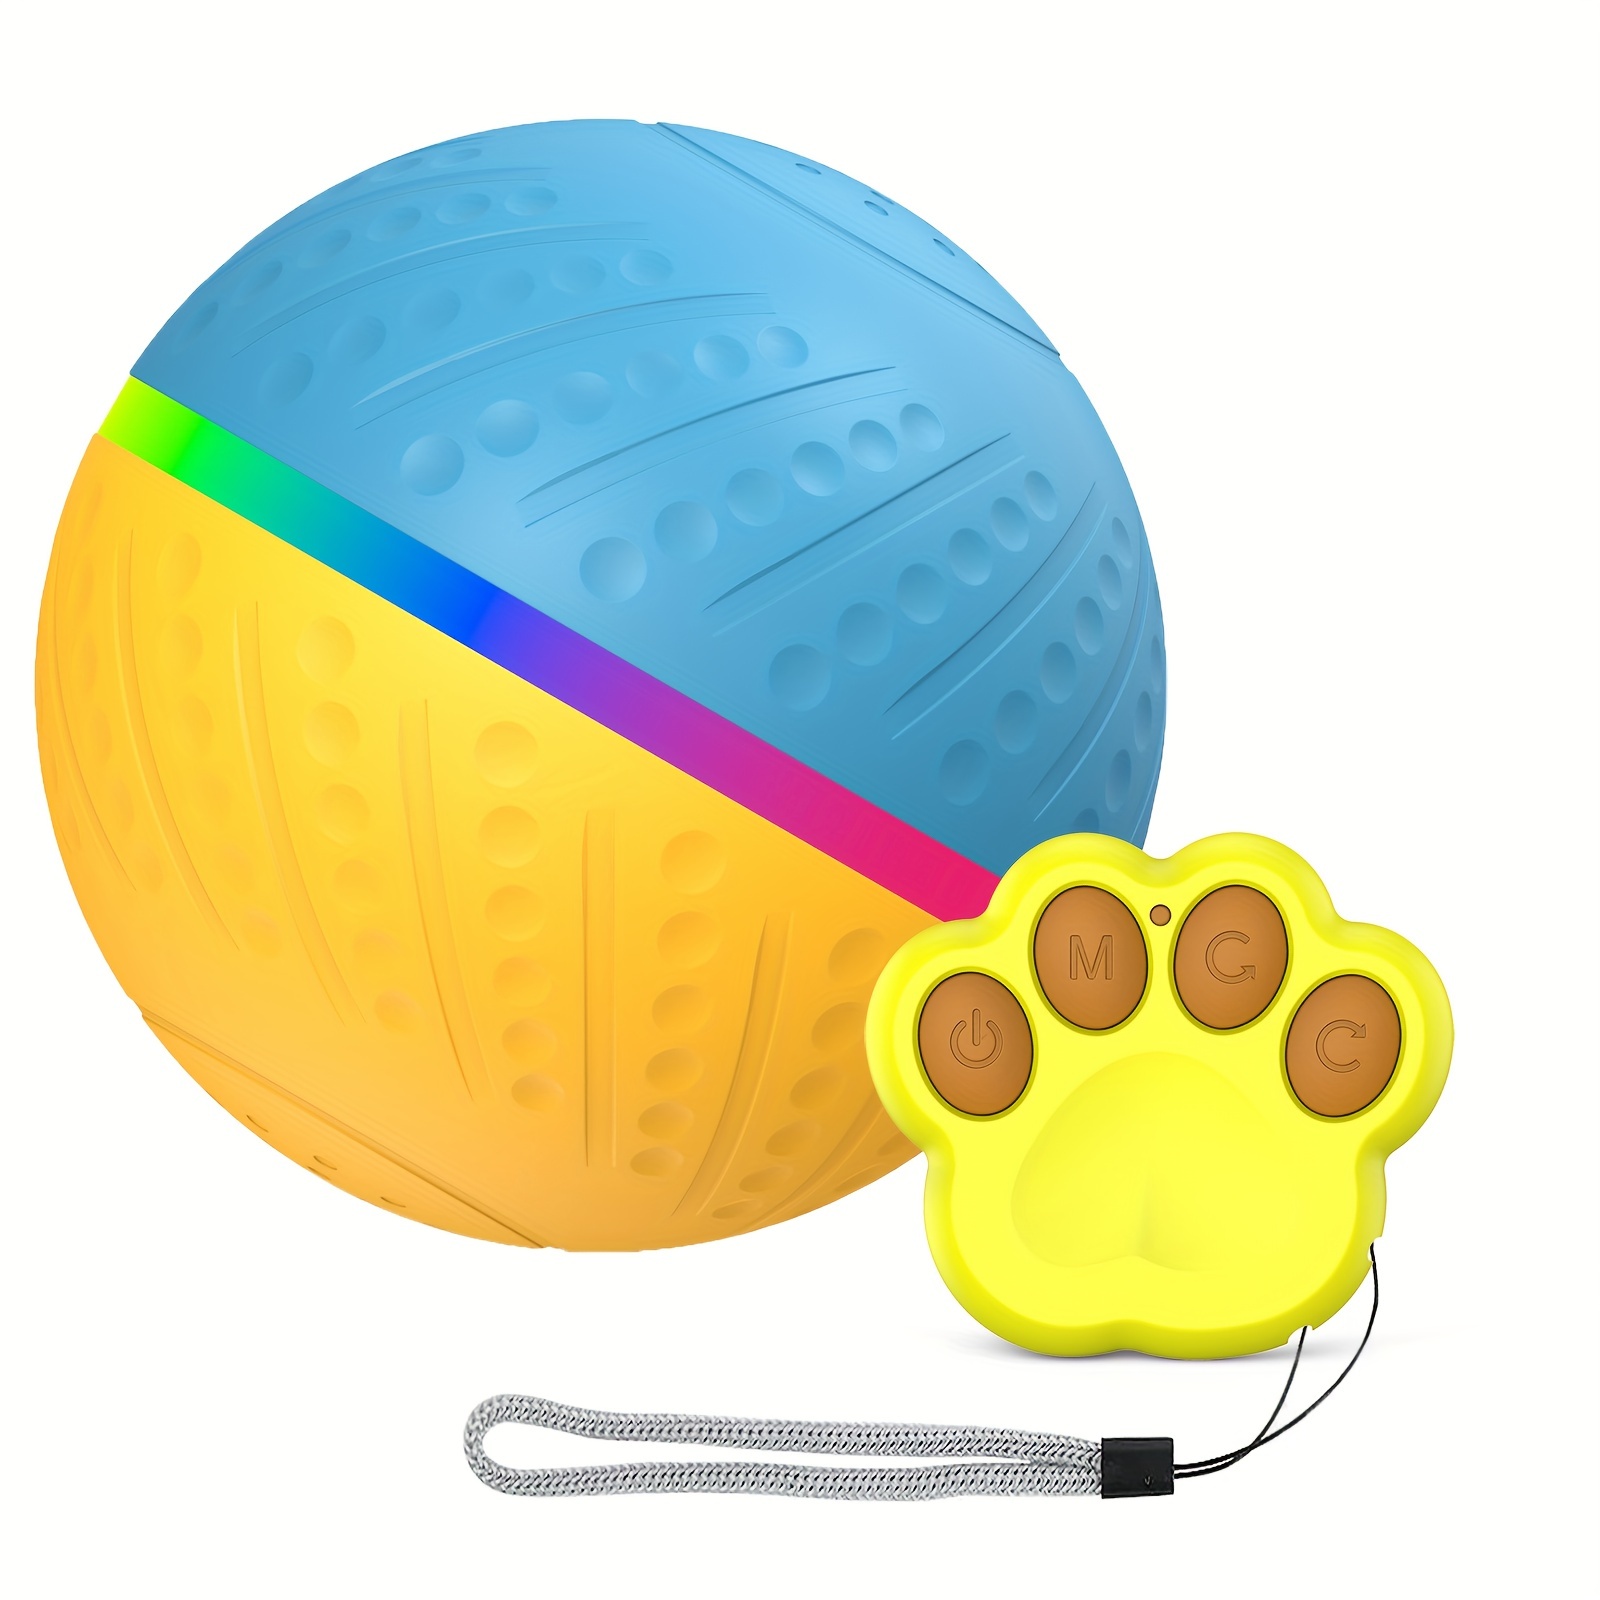 Smart Interactive Dog Balls, Remote Control Dog Chew Toy Ball for